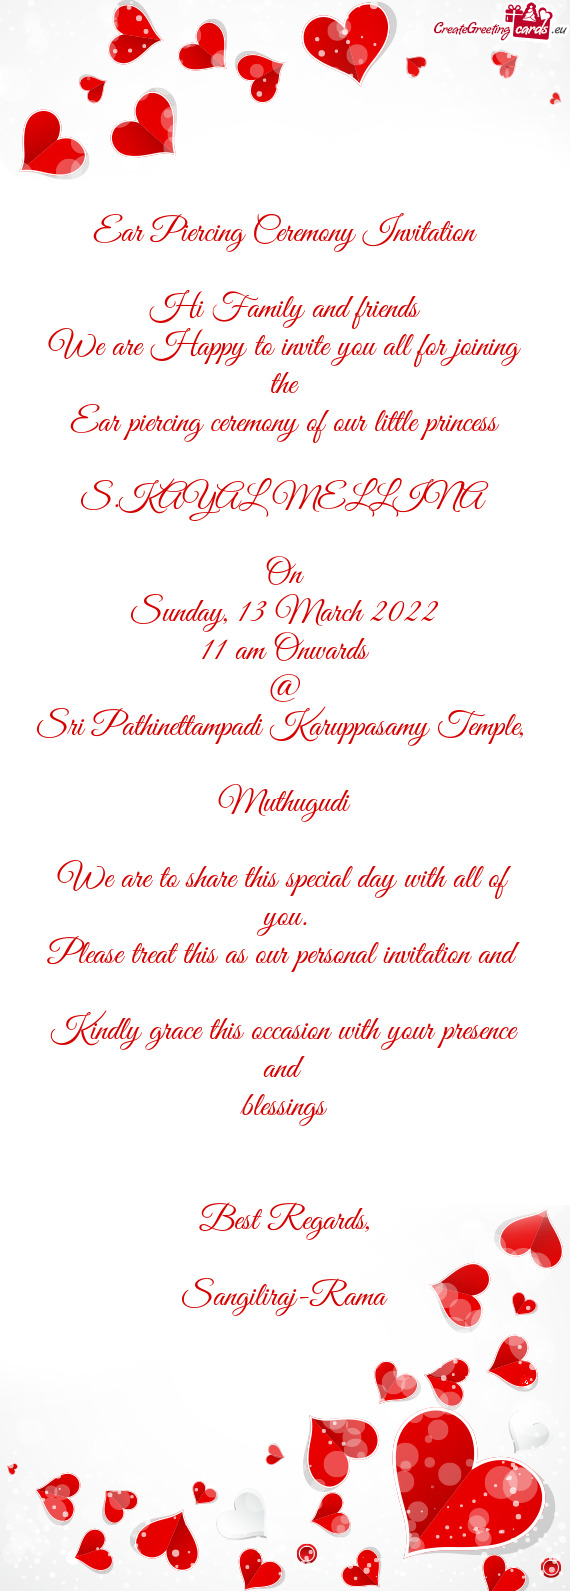 Ear Piercing Ceremony Invitation    Hi Family and friends